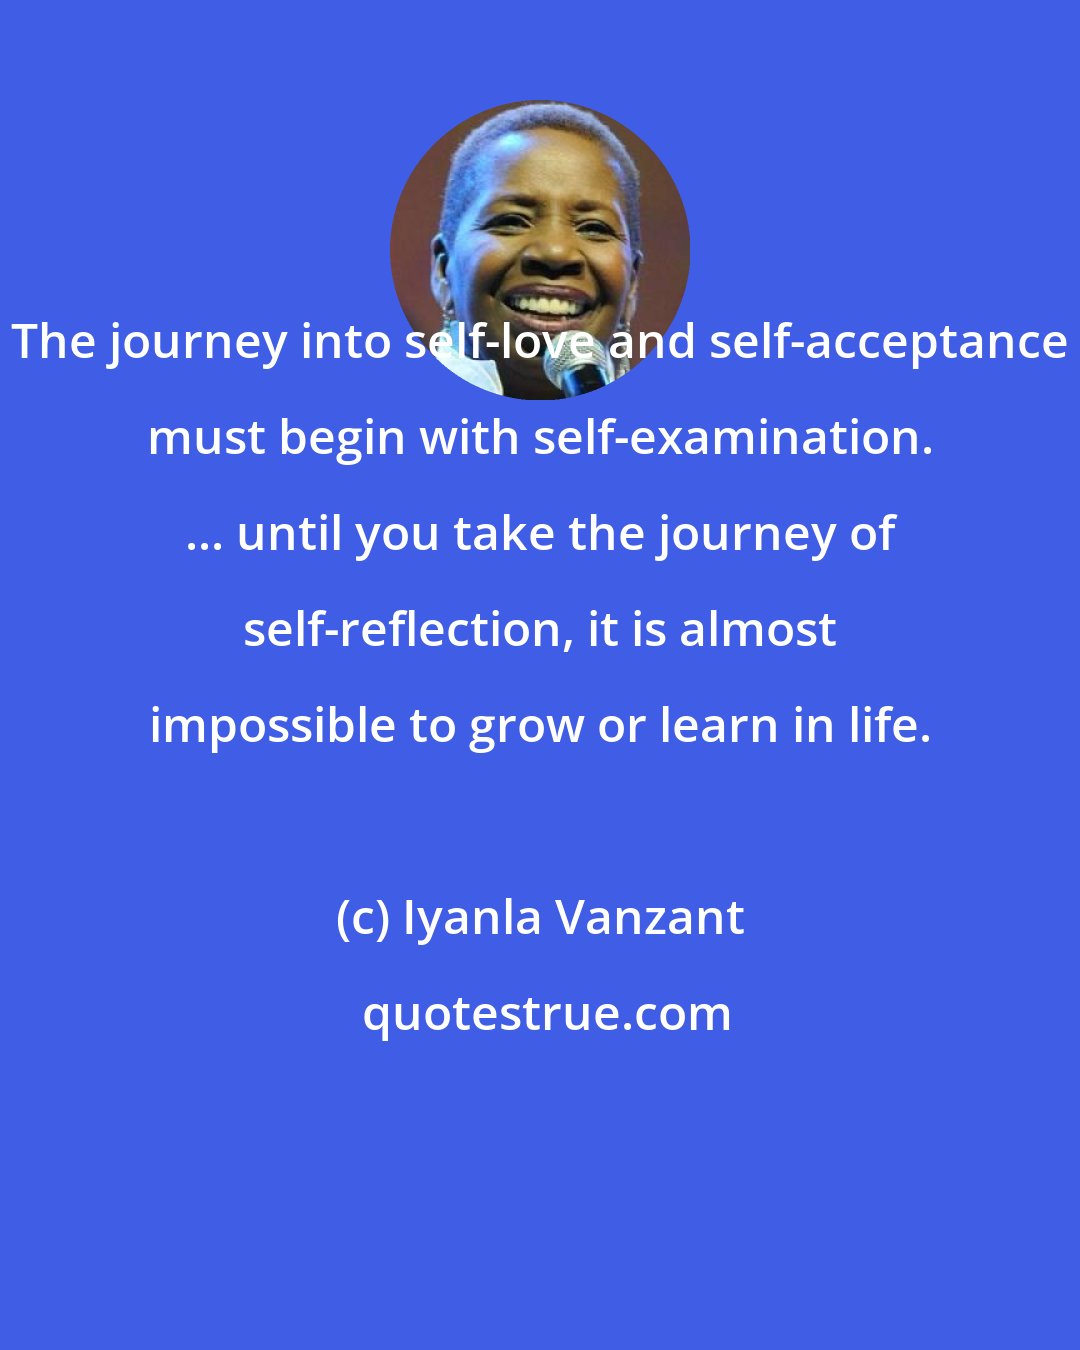 Iyanla Vanzant: The journey into self-love and self-acceptance must begin with self-examination. ... until you take the journey of self-reflection, it is almost impossible to grow or learn in life.